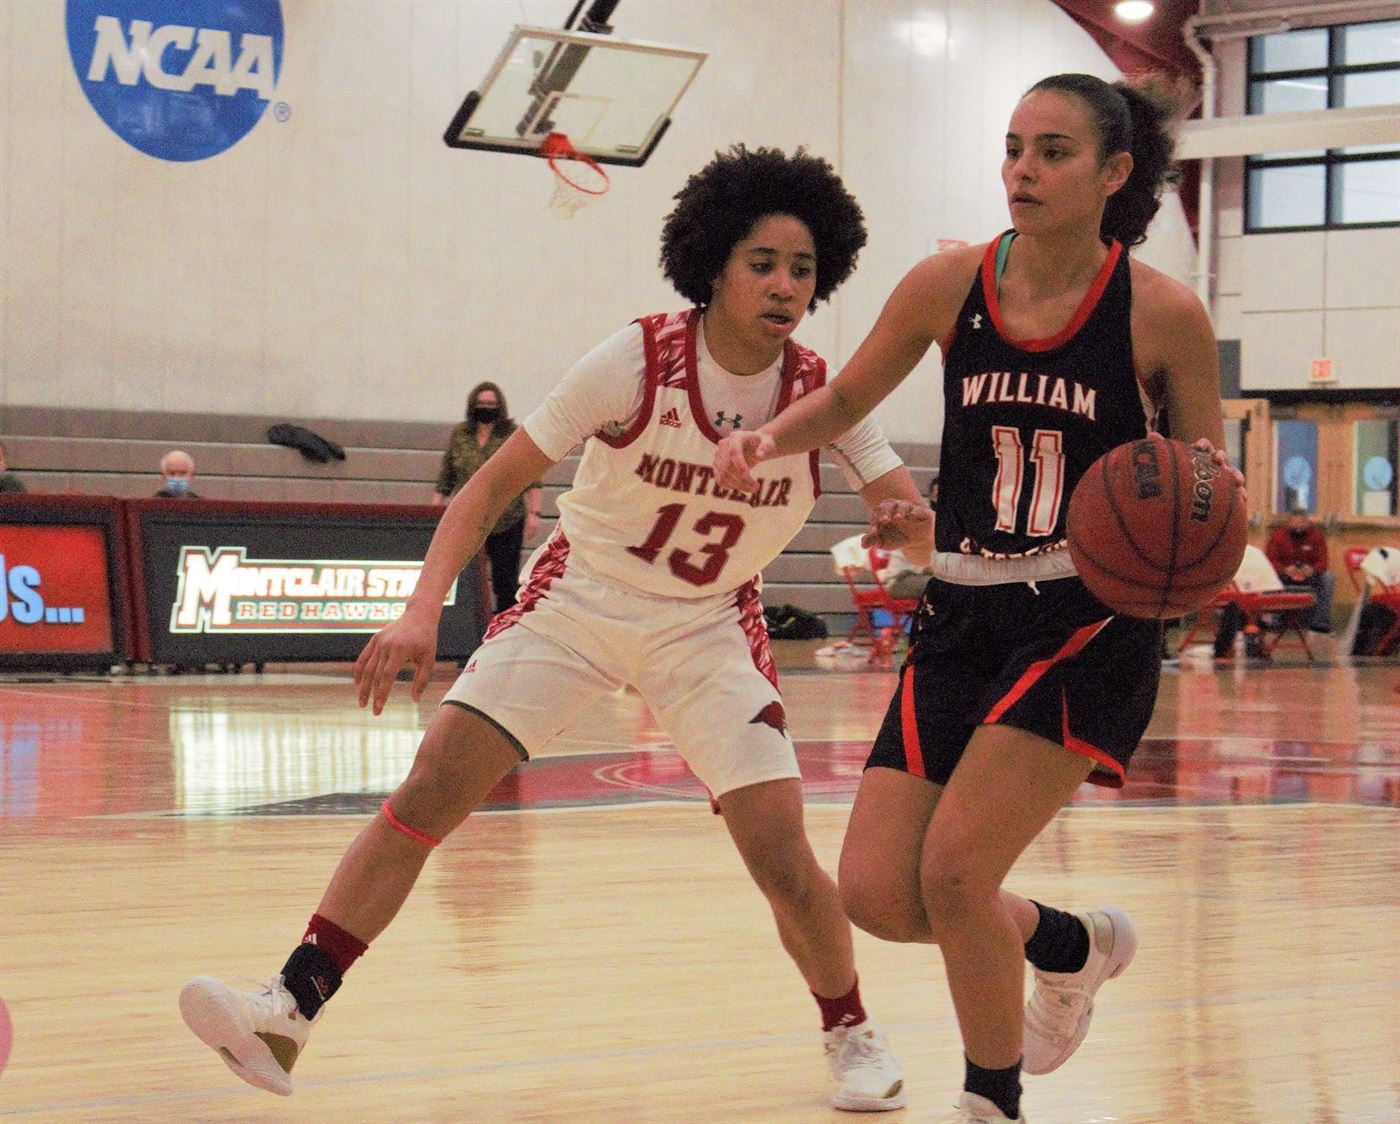 Red Hawks freshman guard Kendall Hodges closely guards a William Paterson player.